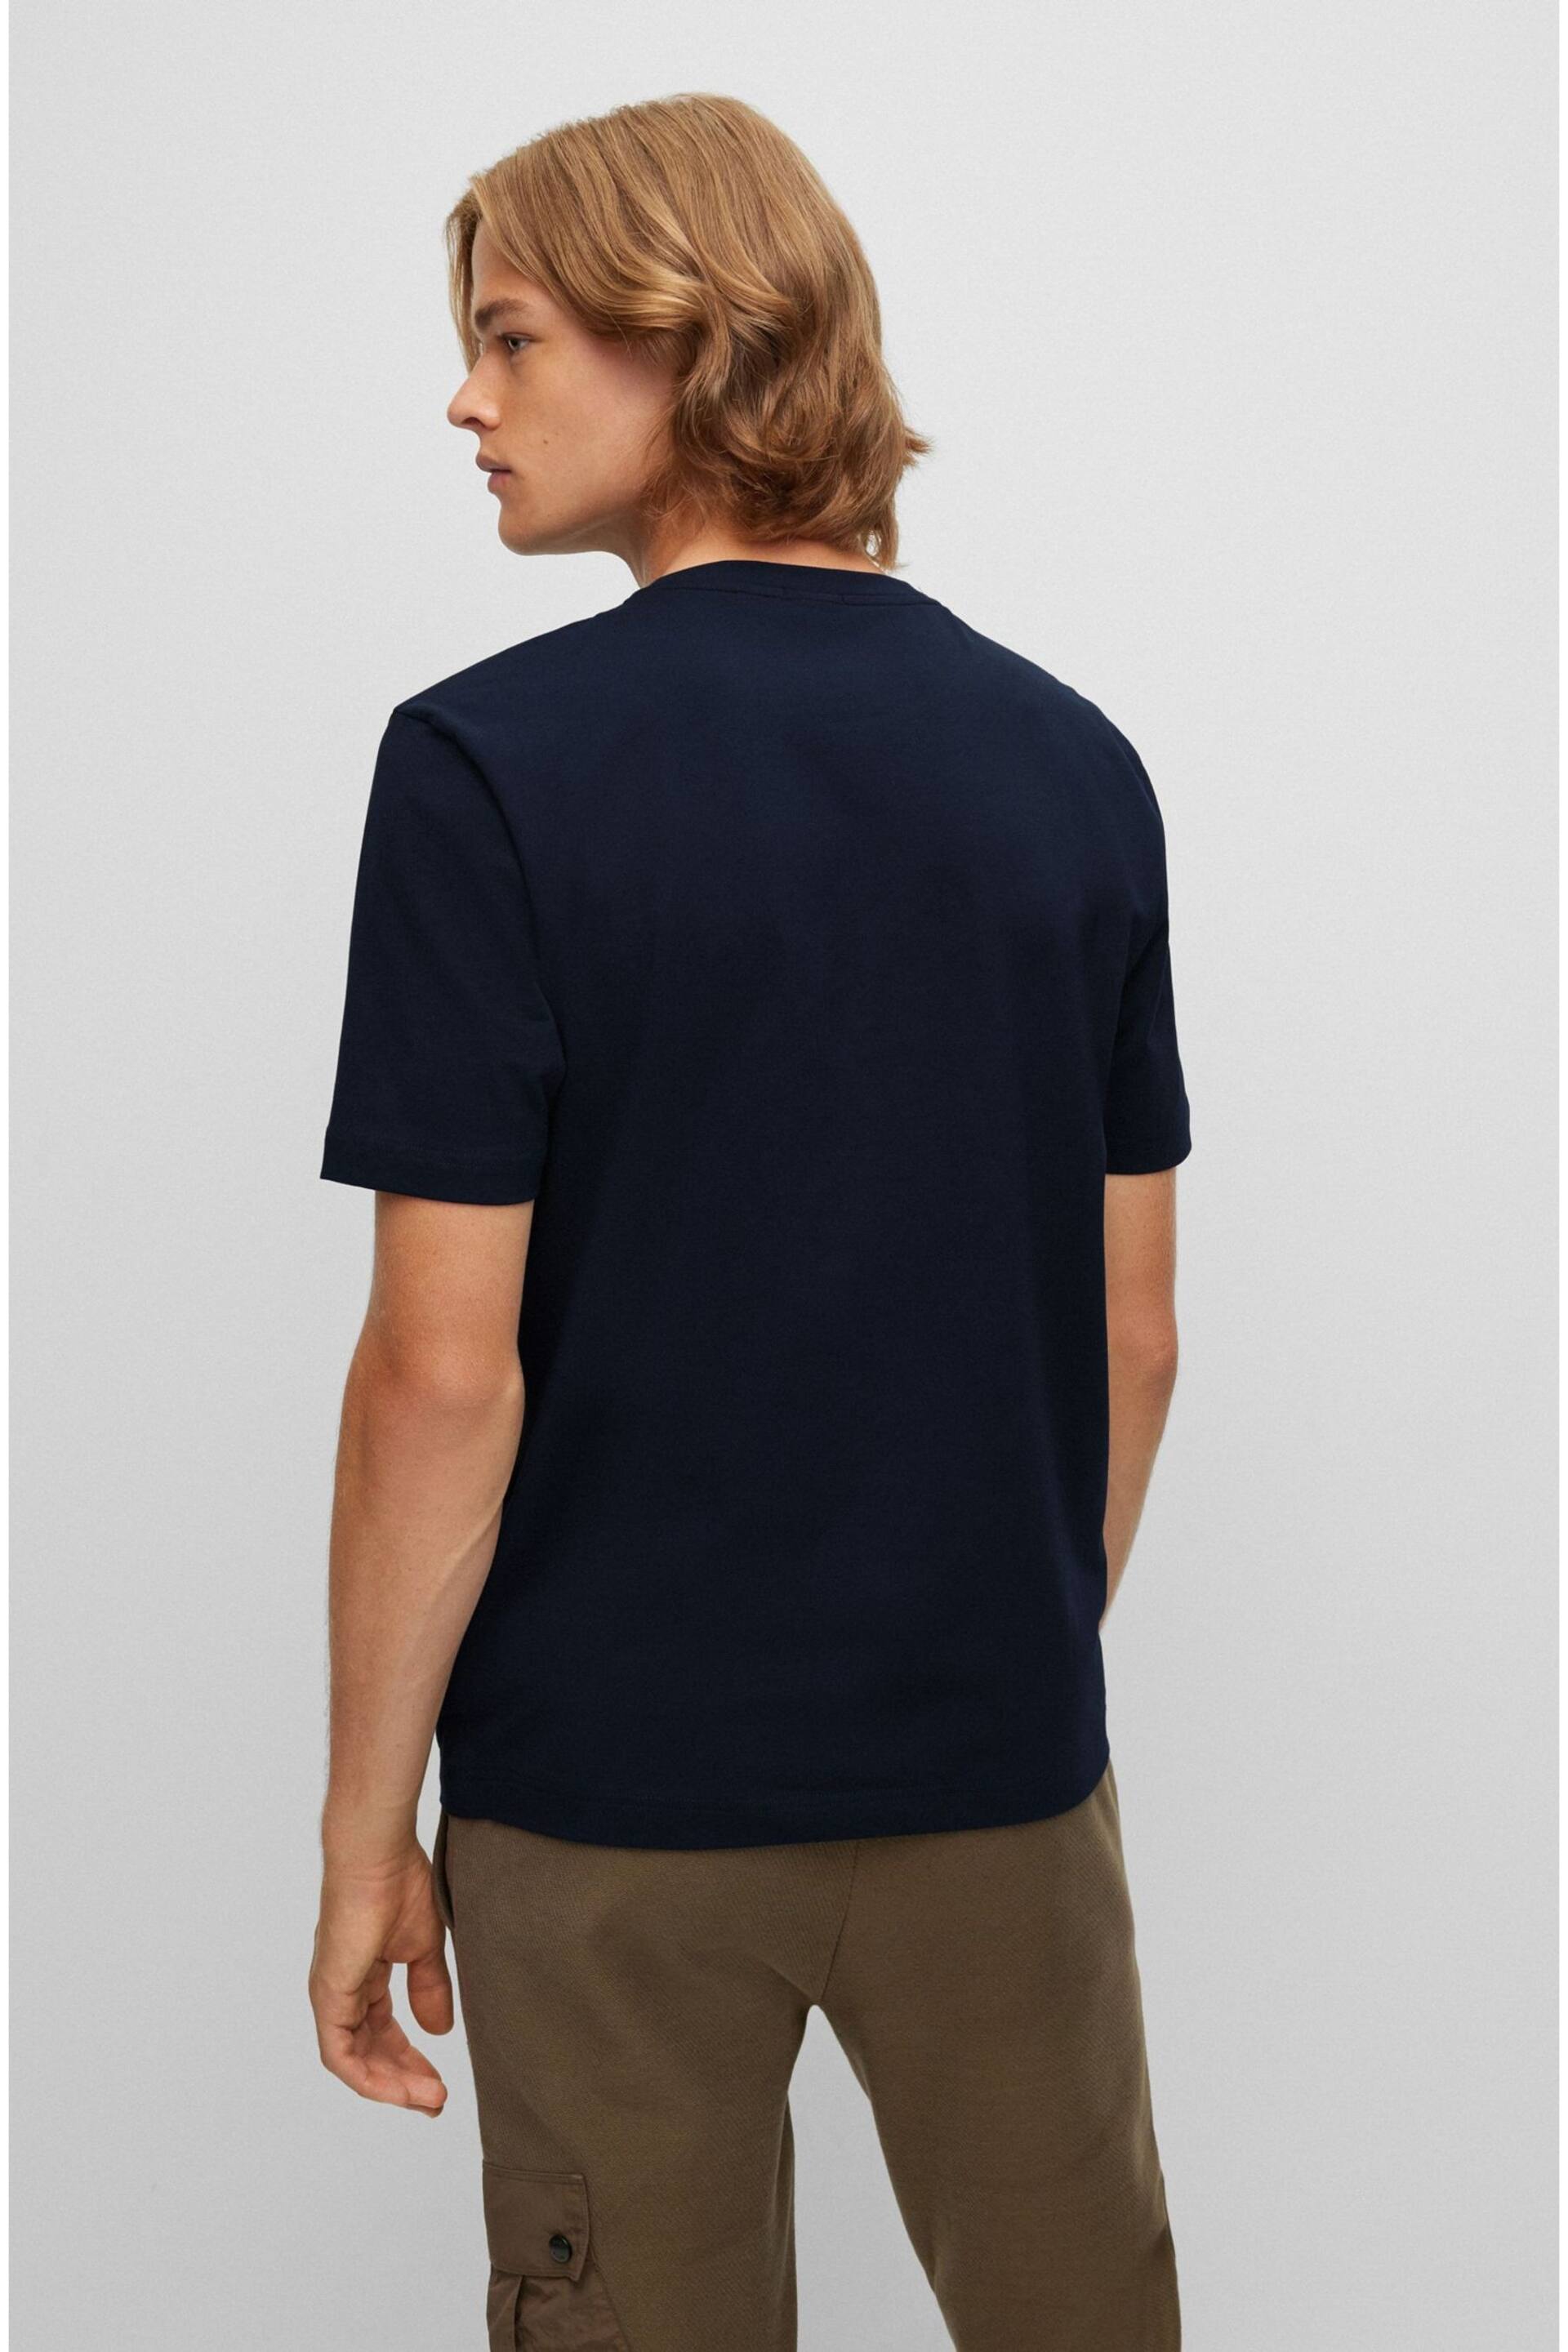 BOSS Dark Blue Relaxed Fit Central Logo T-Shirt - Image 2 of 4